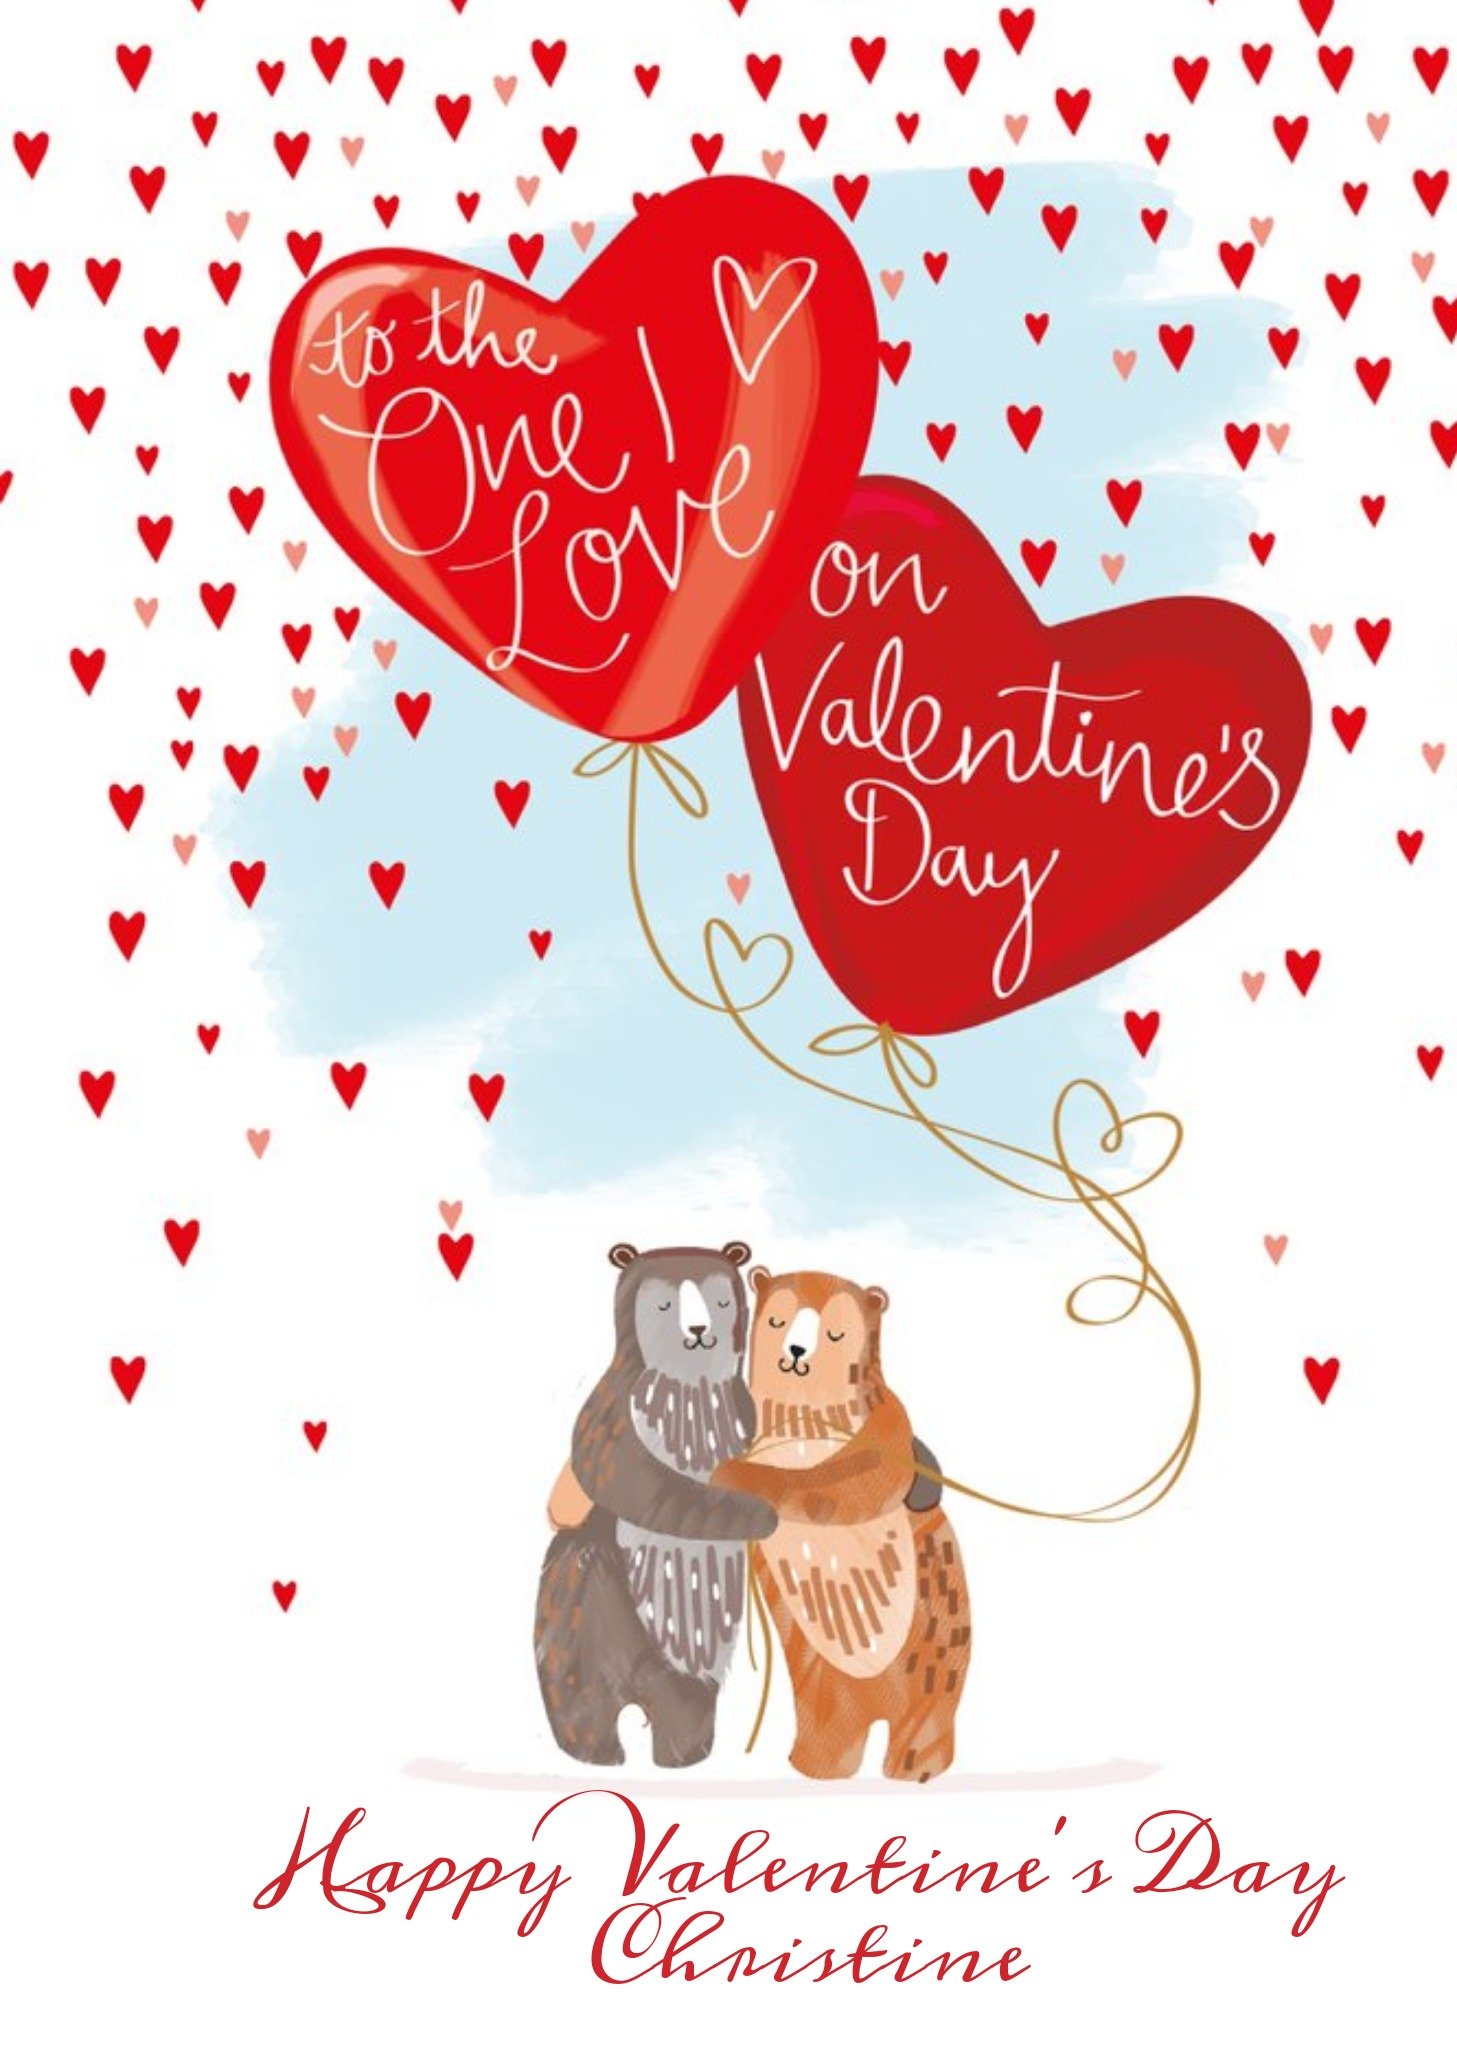 Ling Design Cute Cuddling Bears To The One I Love Valentine's Day Card, Large